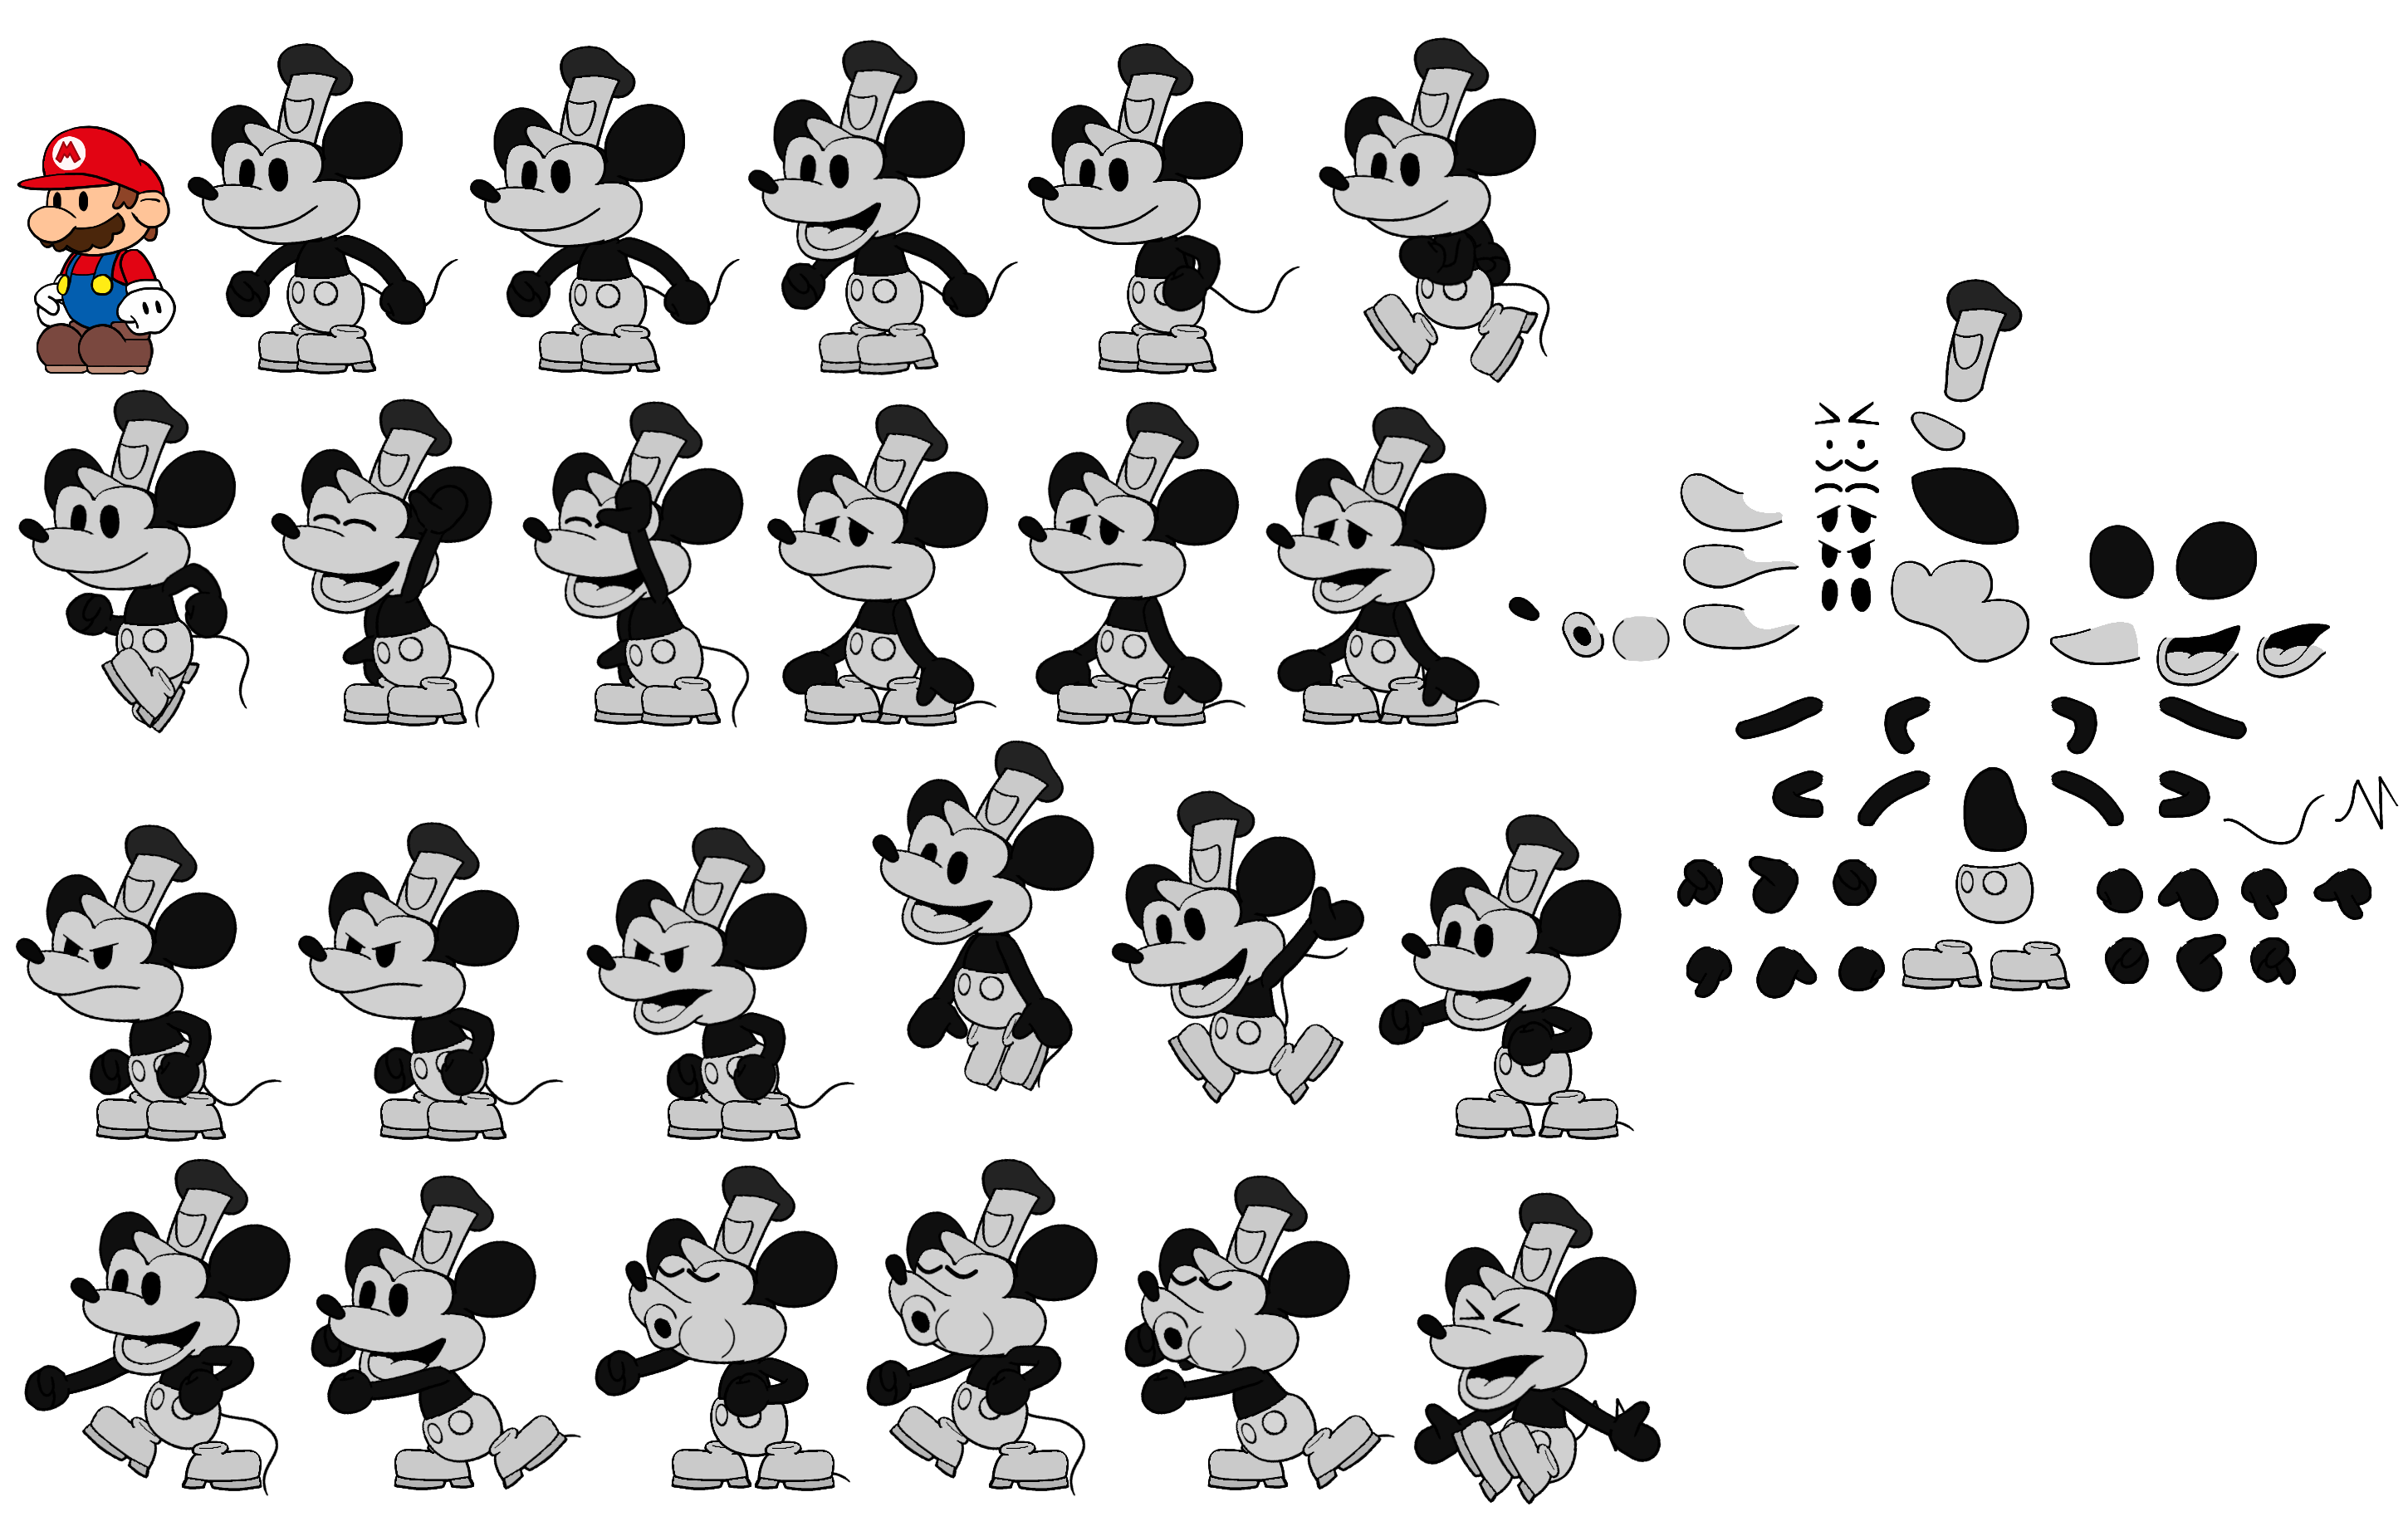 Mickey Mouse (Steamboat Willie, Paper Mario-Style)